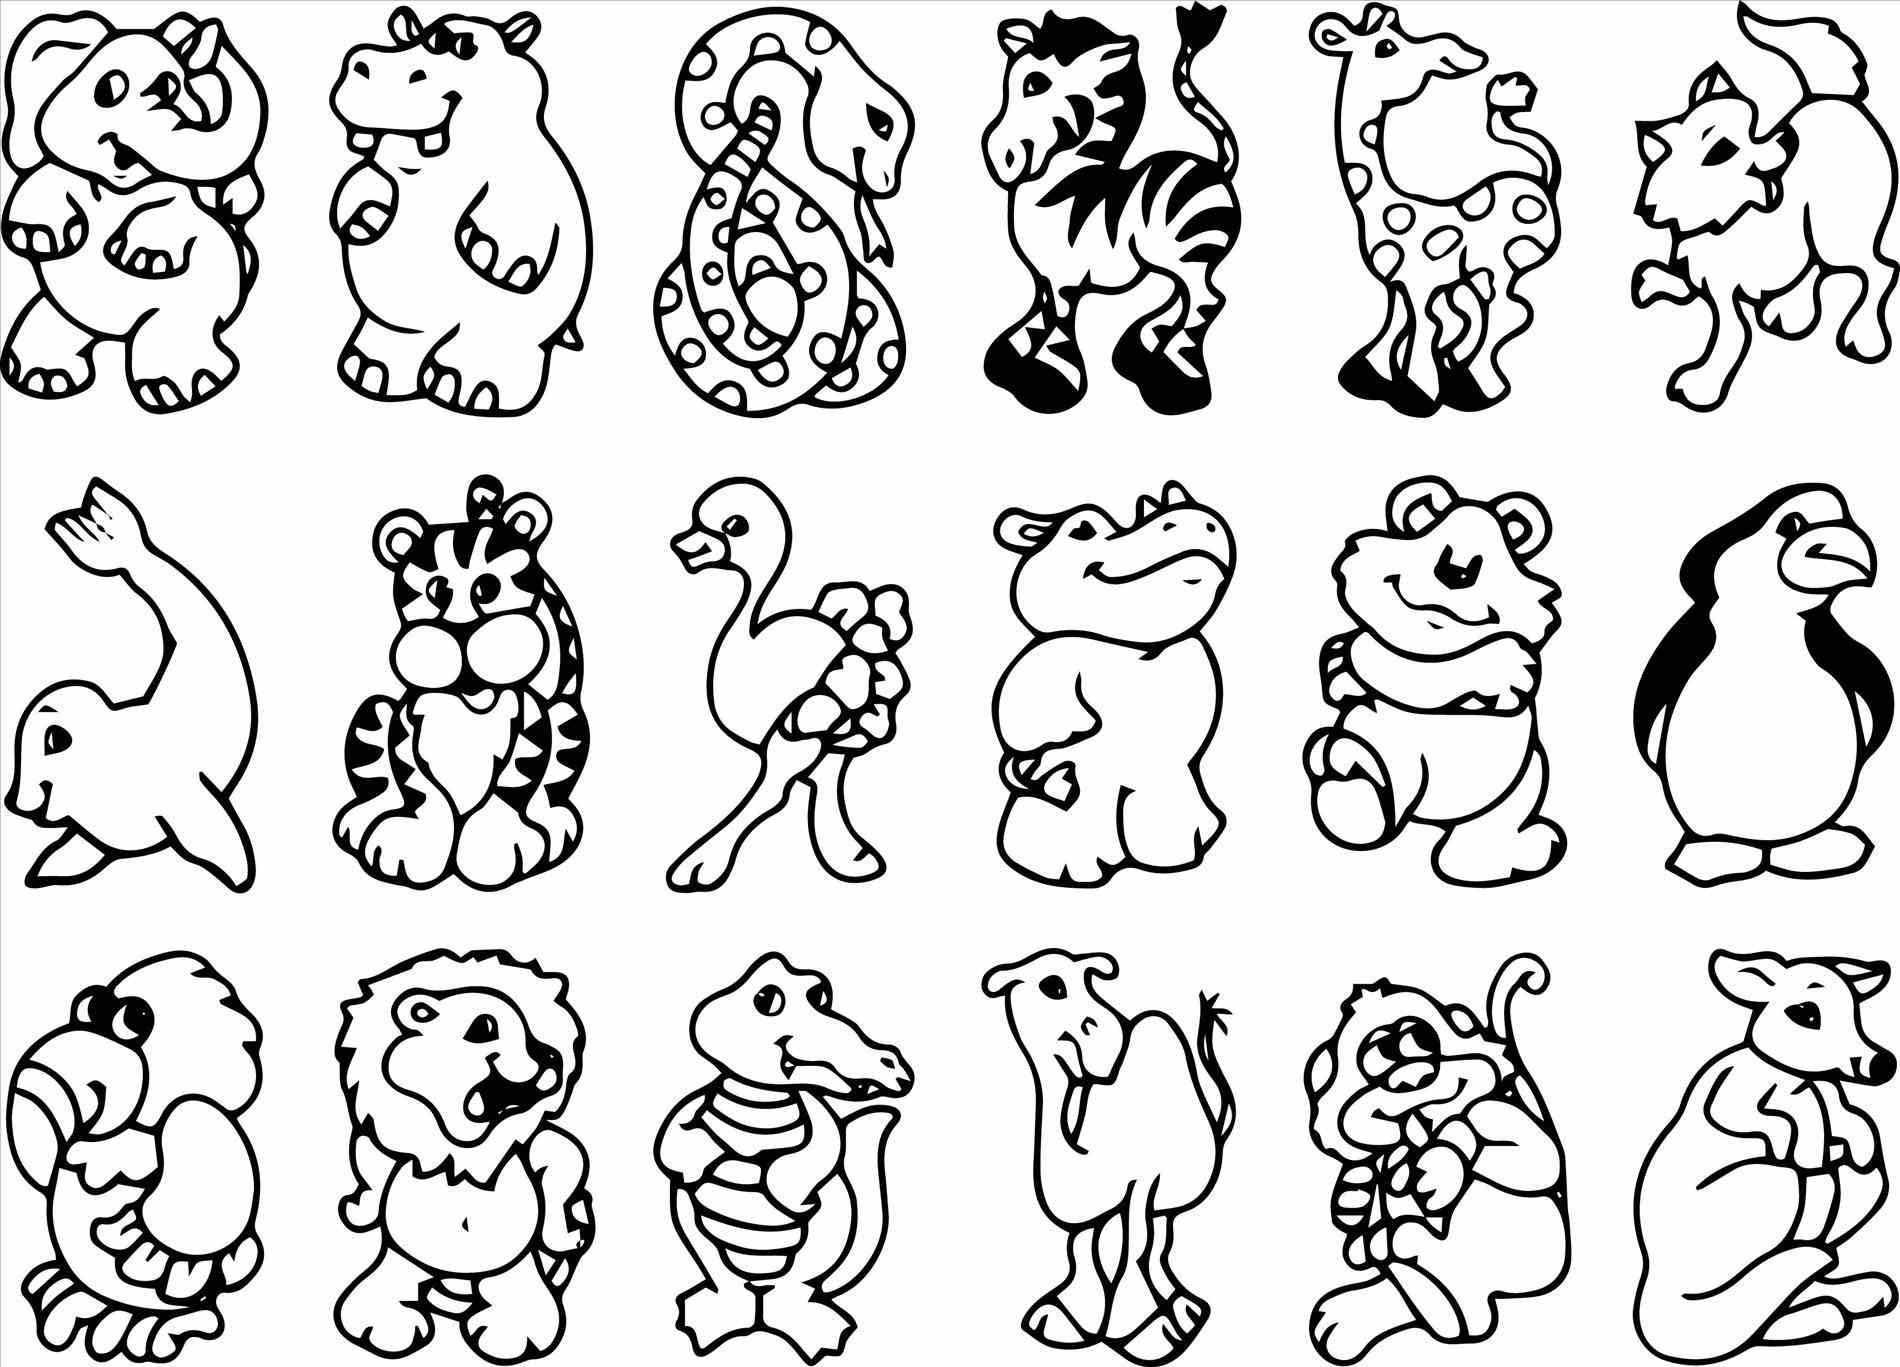 Animal Printable Coloring Sheets
 Zoo Coloring Page Image Clipart grig3